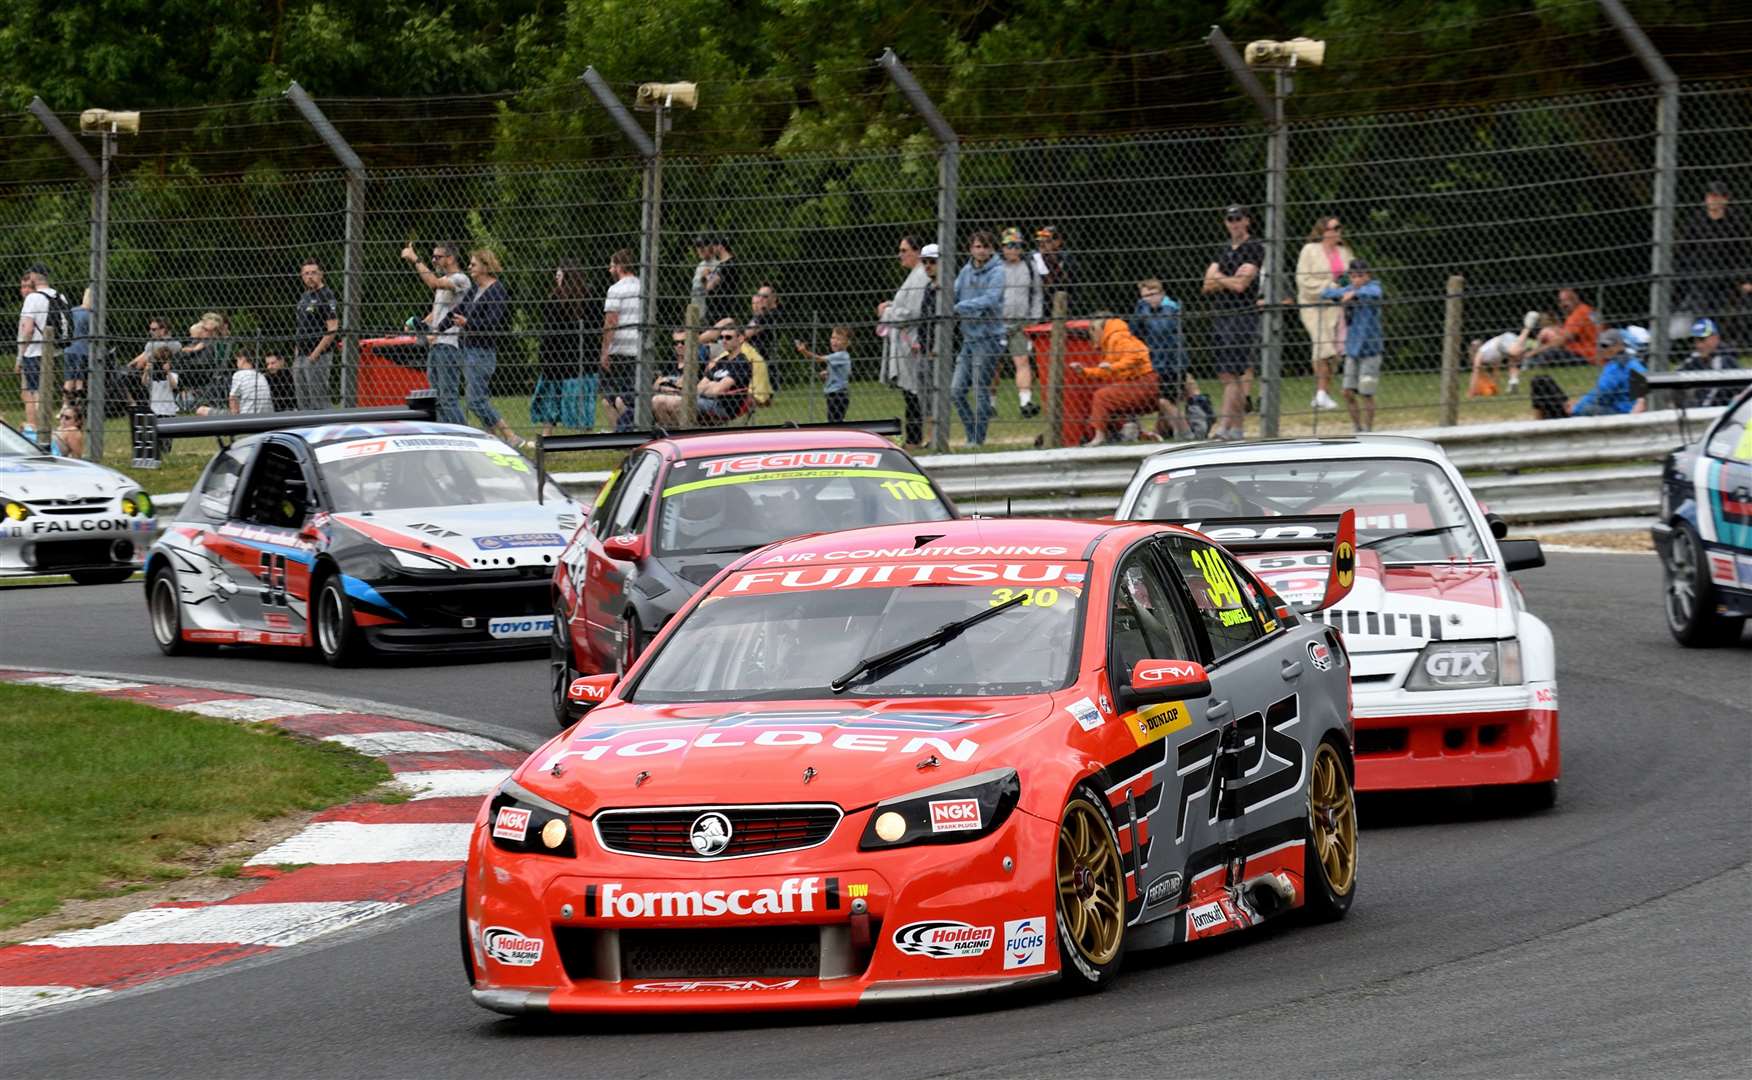 Alex Sidwell, from Maidstone, scored an outright win in the Classic Thunder races in his Holden Commodore. Picture: Simon Hildrew